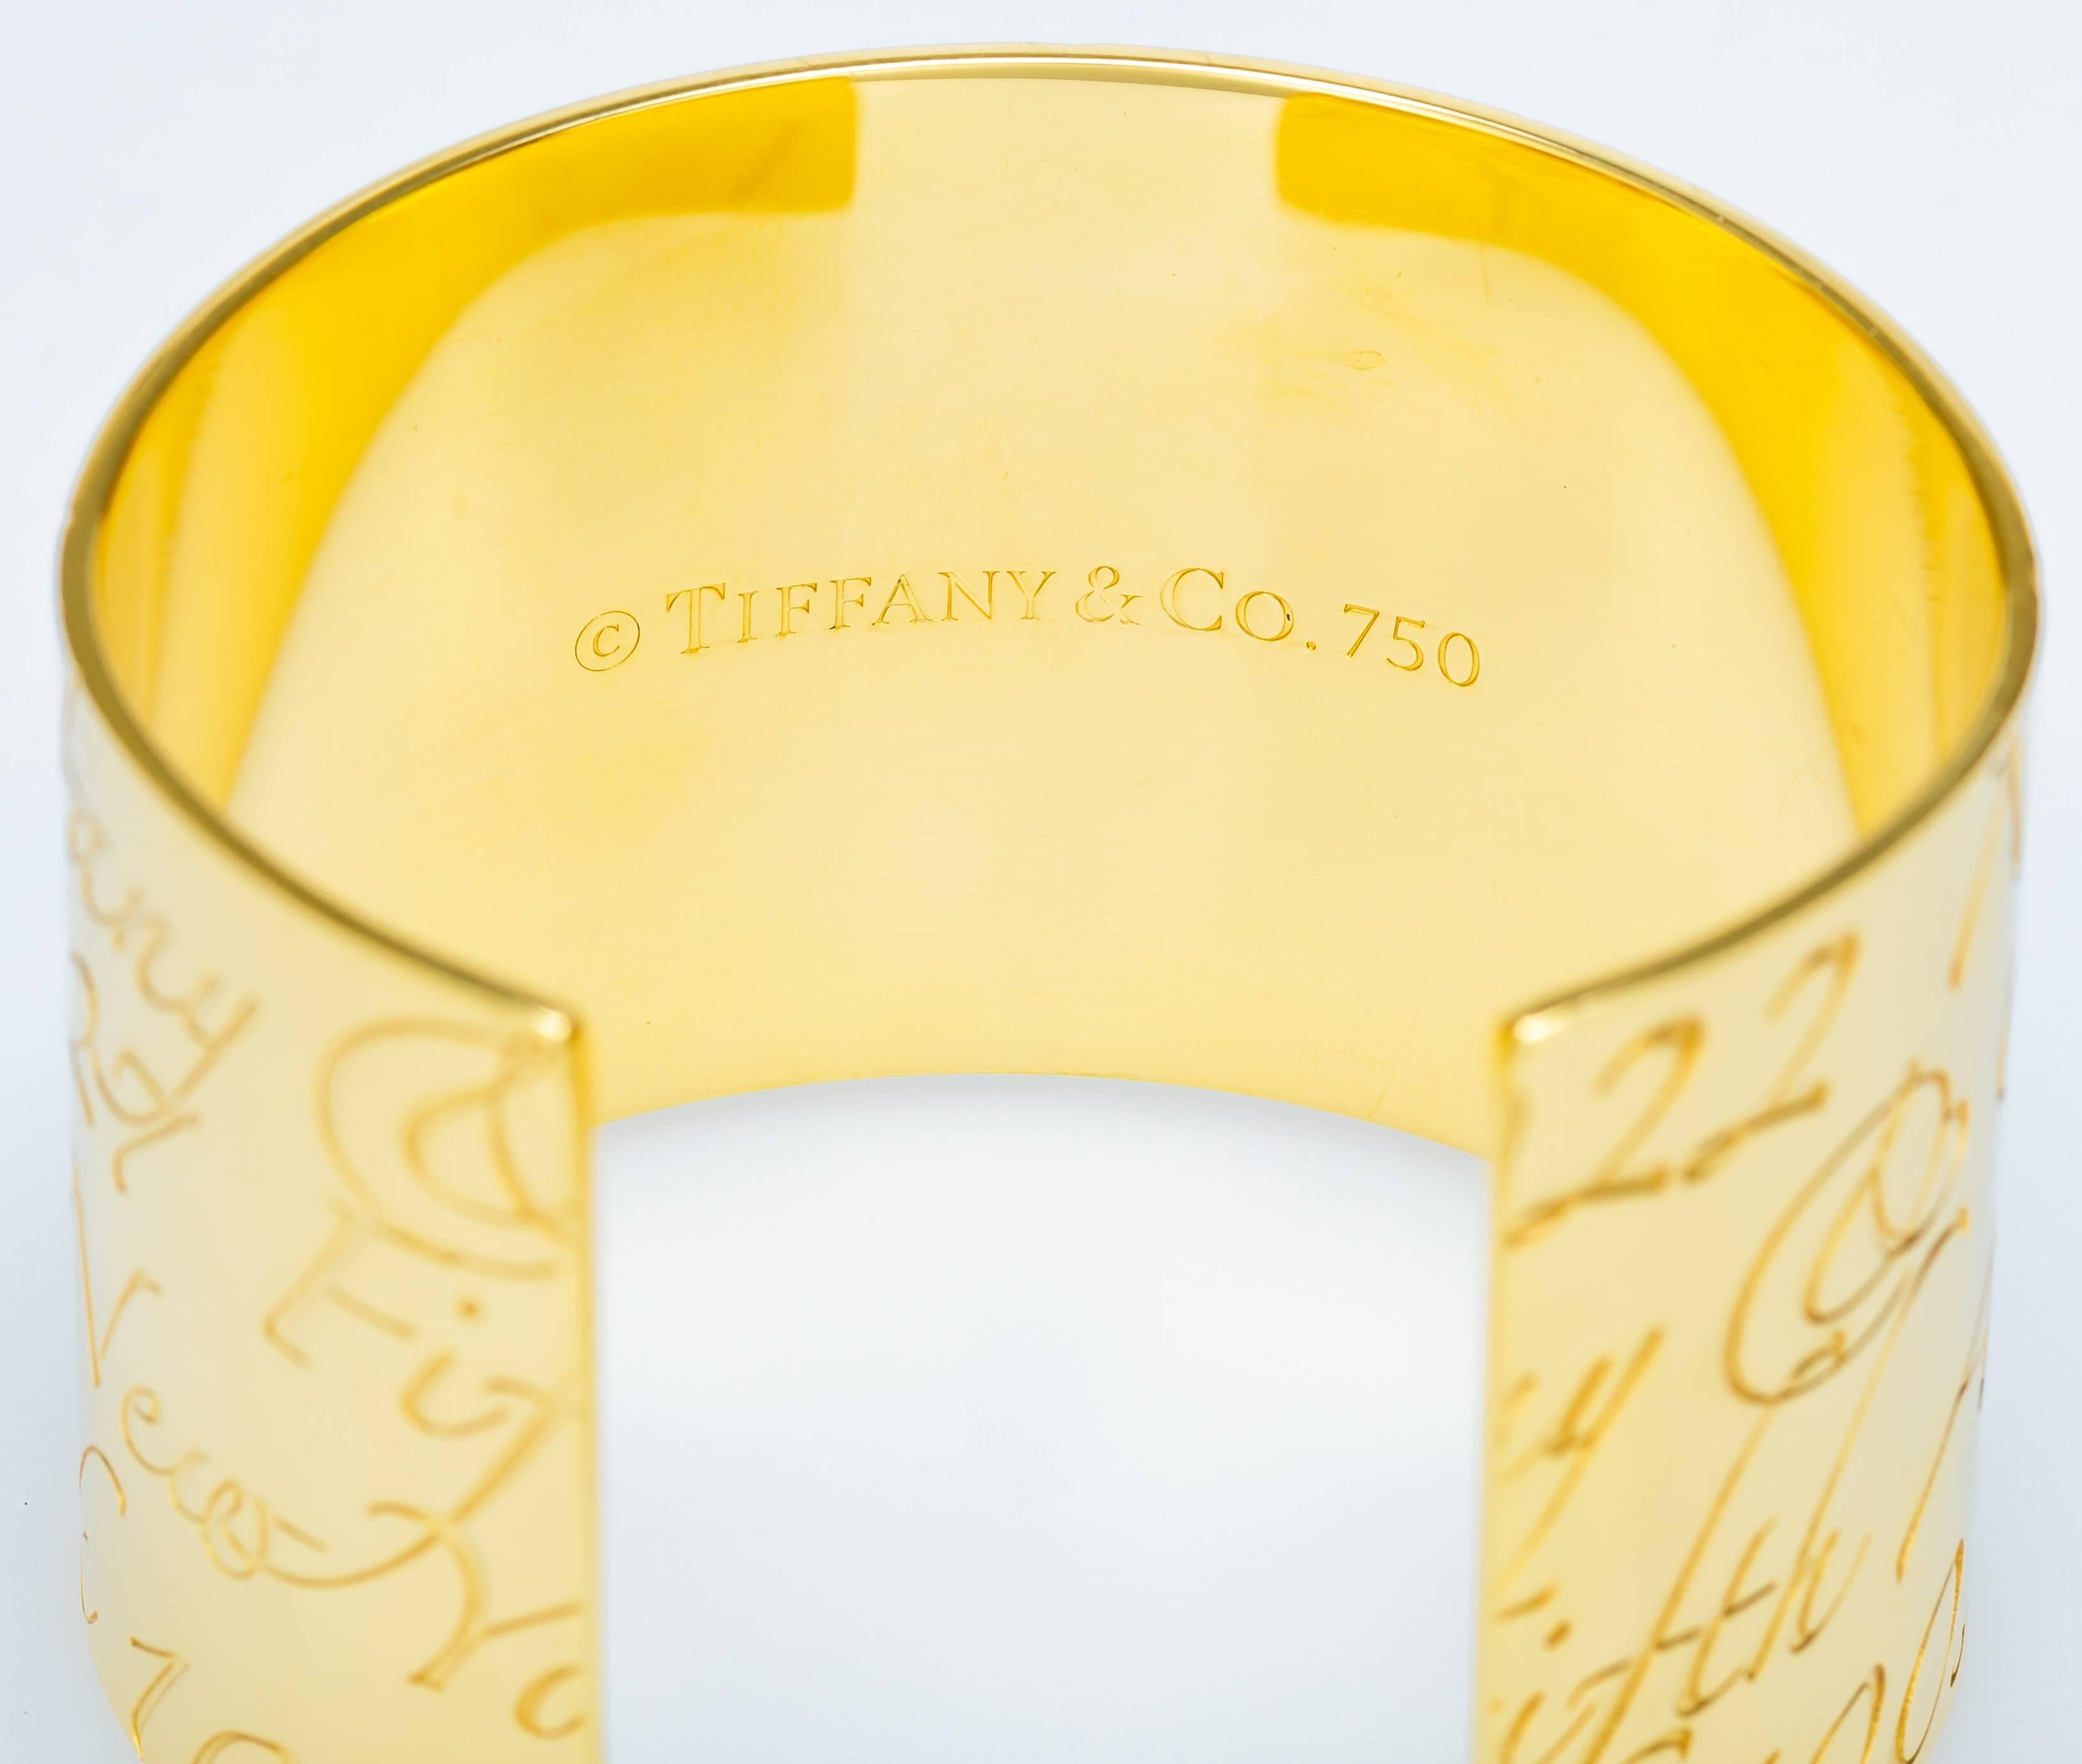 This 18K yellow gold Tiffany & Co. cuff from the Notes collection is features the address of the flagship Tiffany store in New York.  The bracelet measures ~5.5 inches long (~6.5 including the gap) and ~1.5 inches wide.  It has been lightly polished